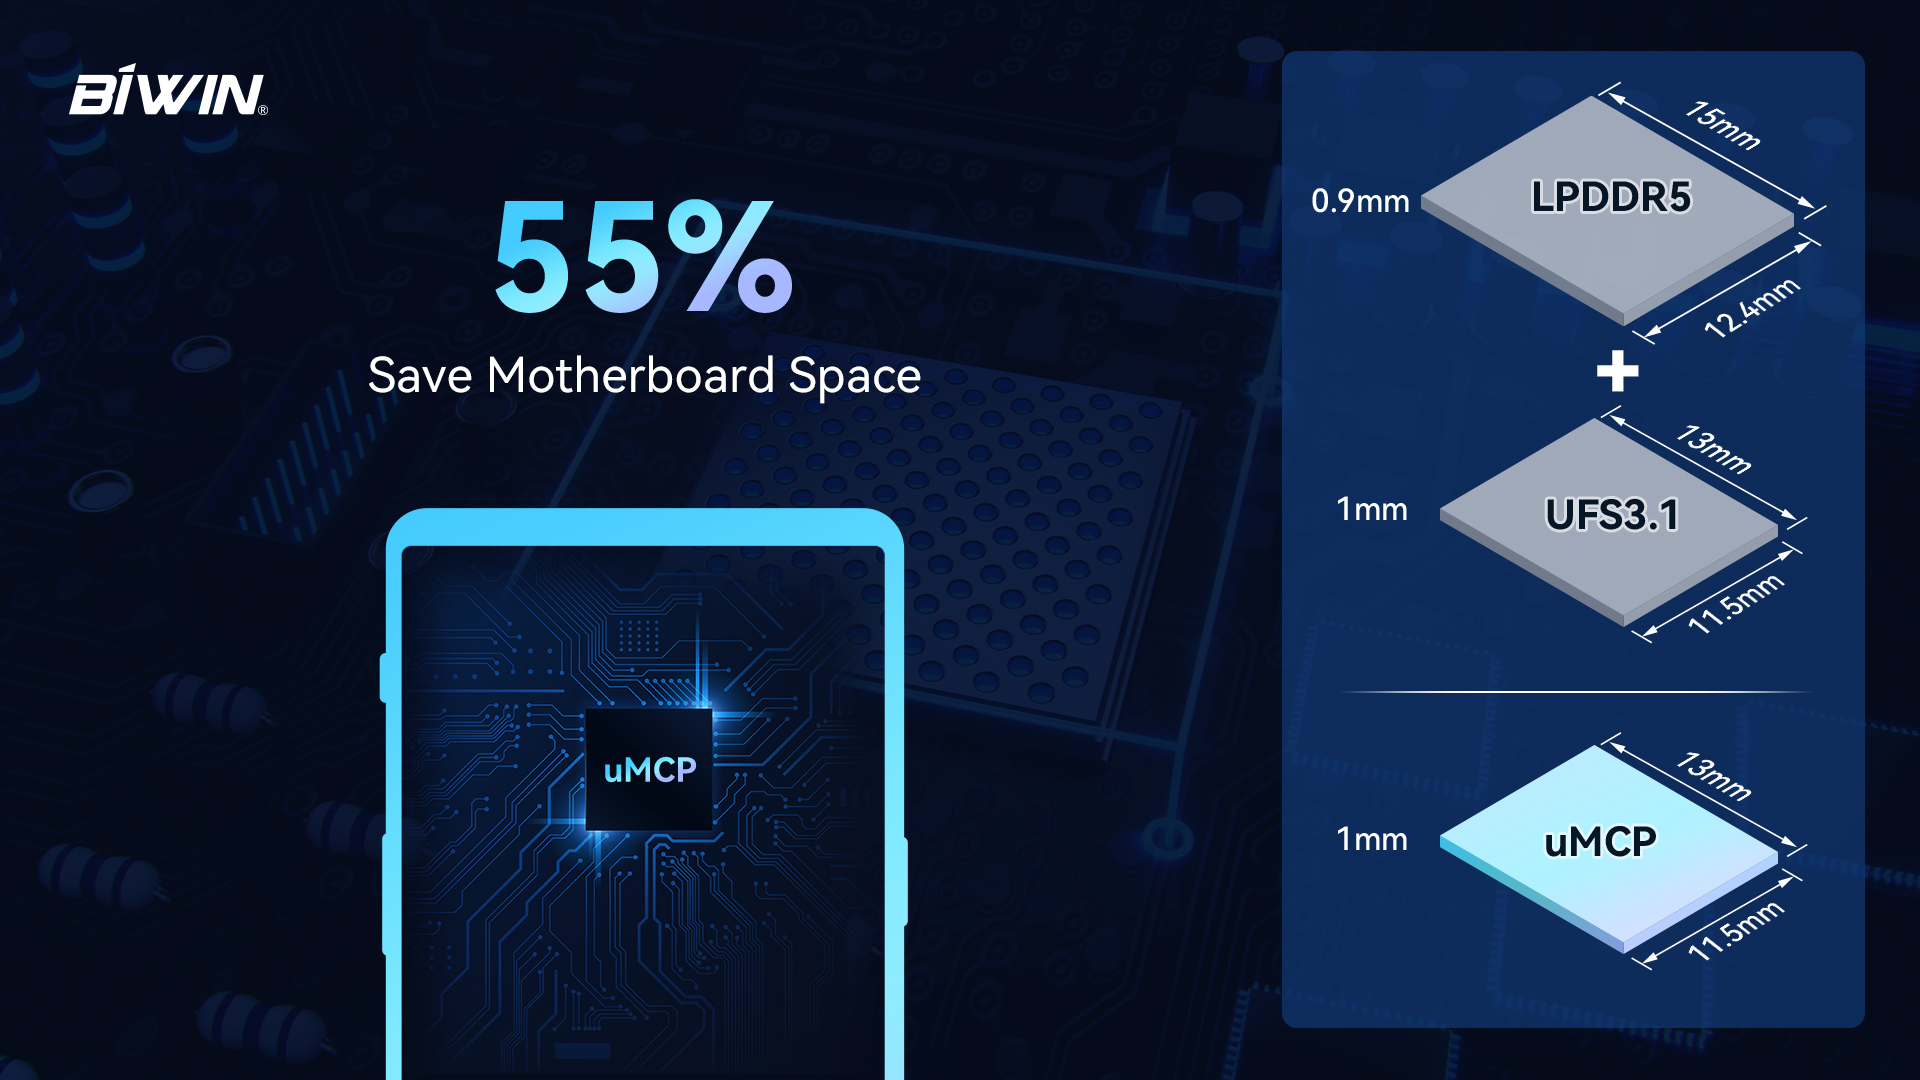 Save motherboard space